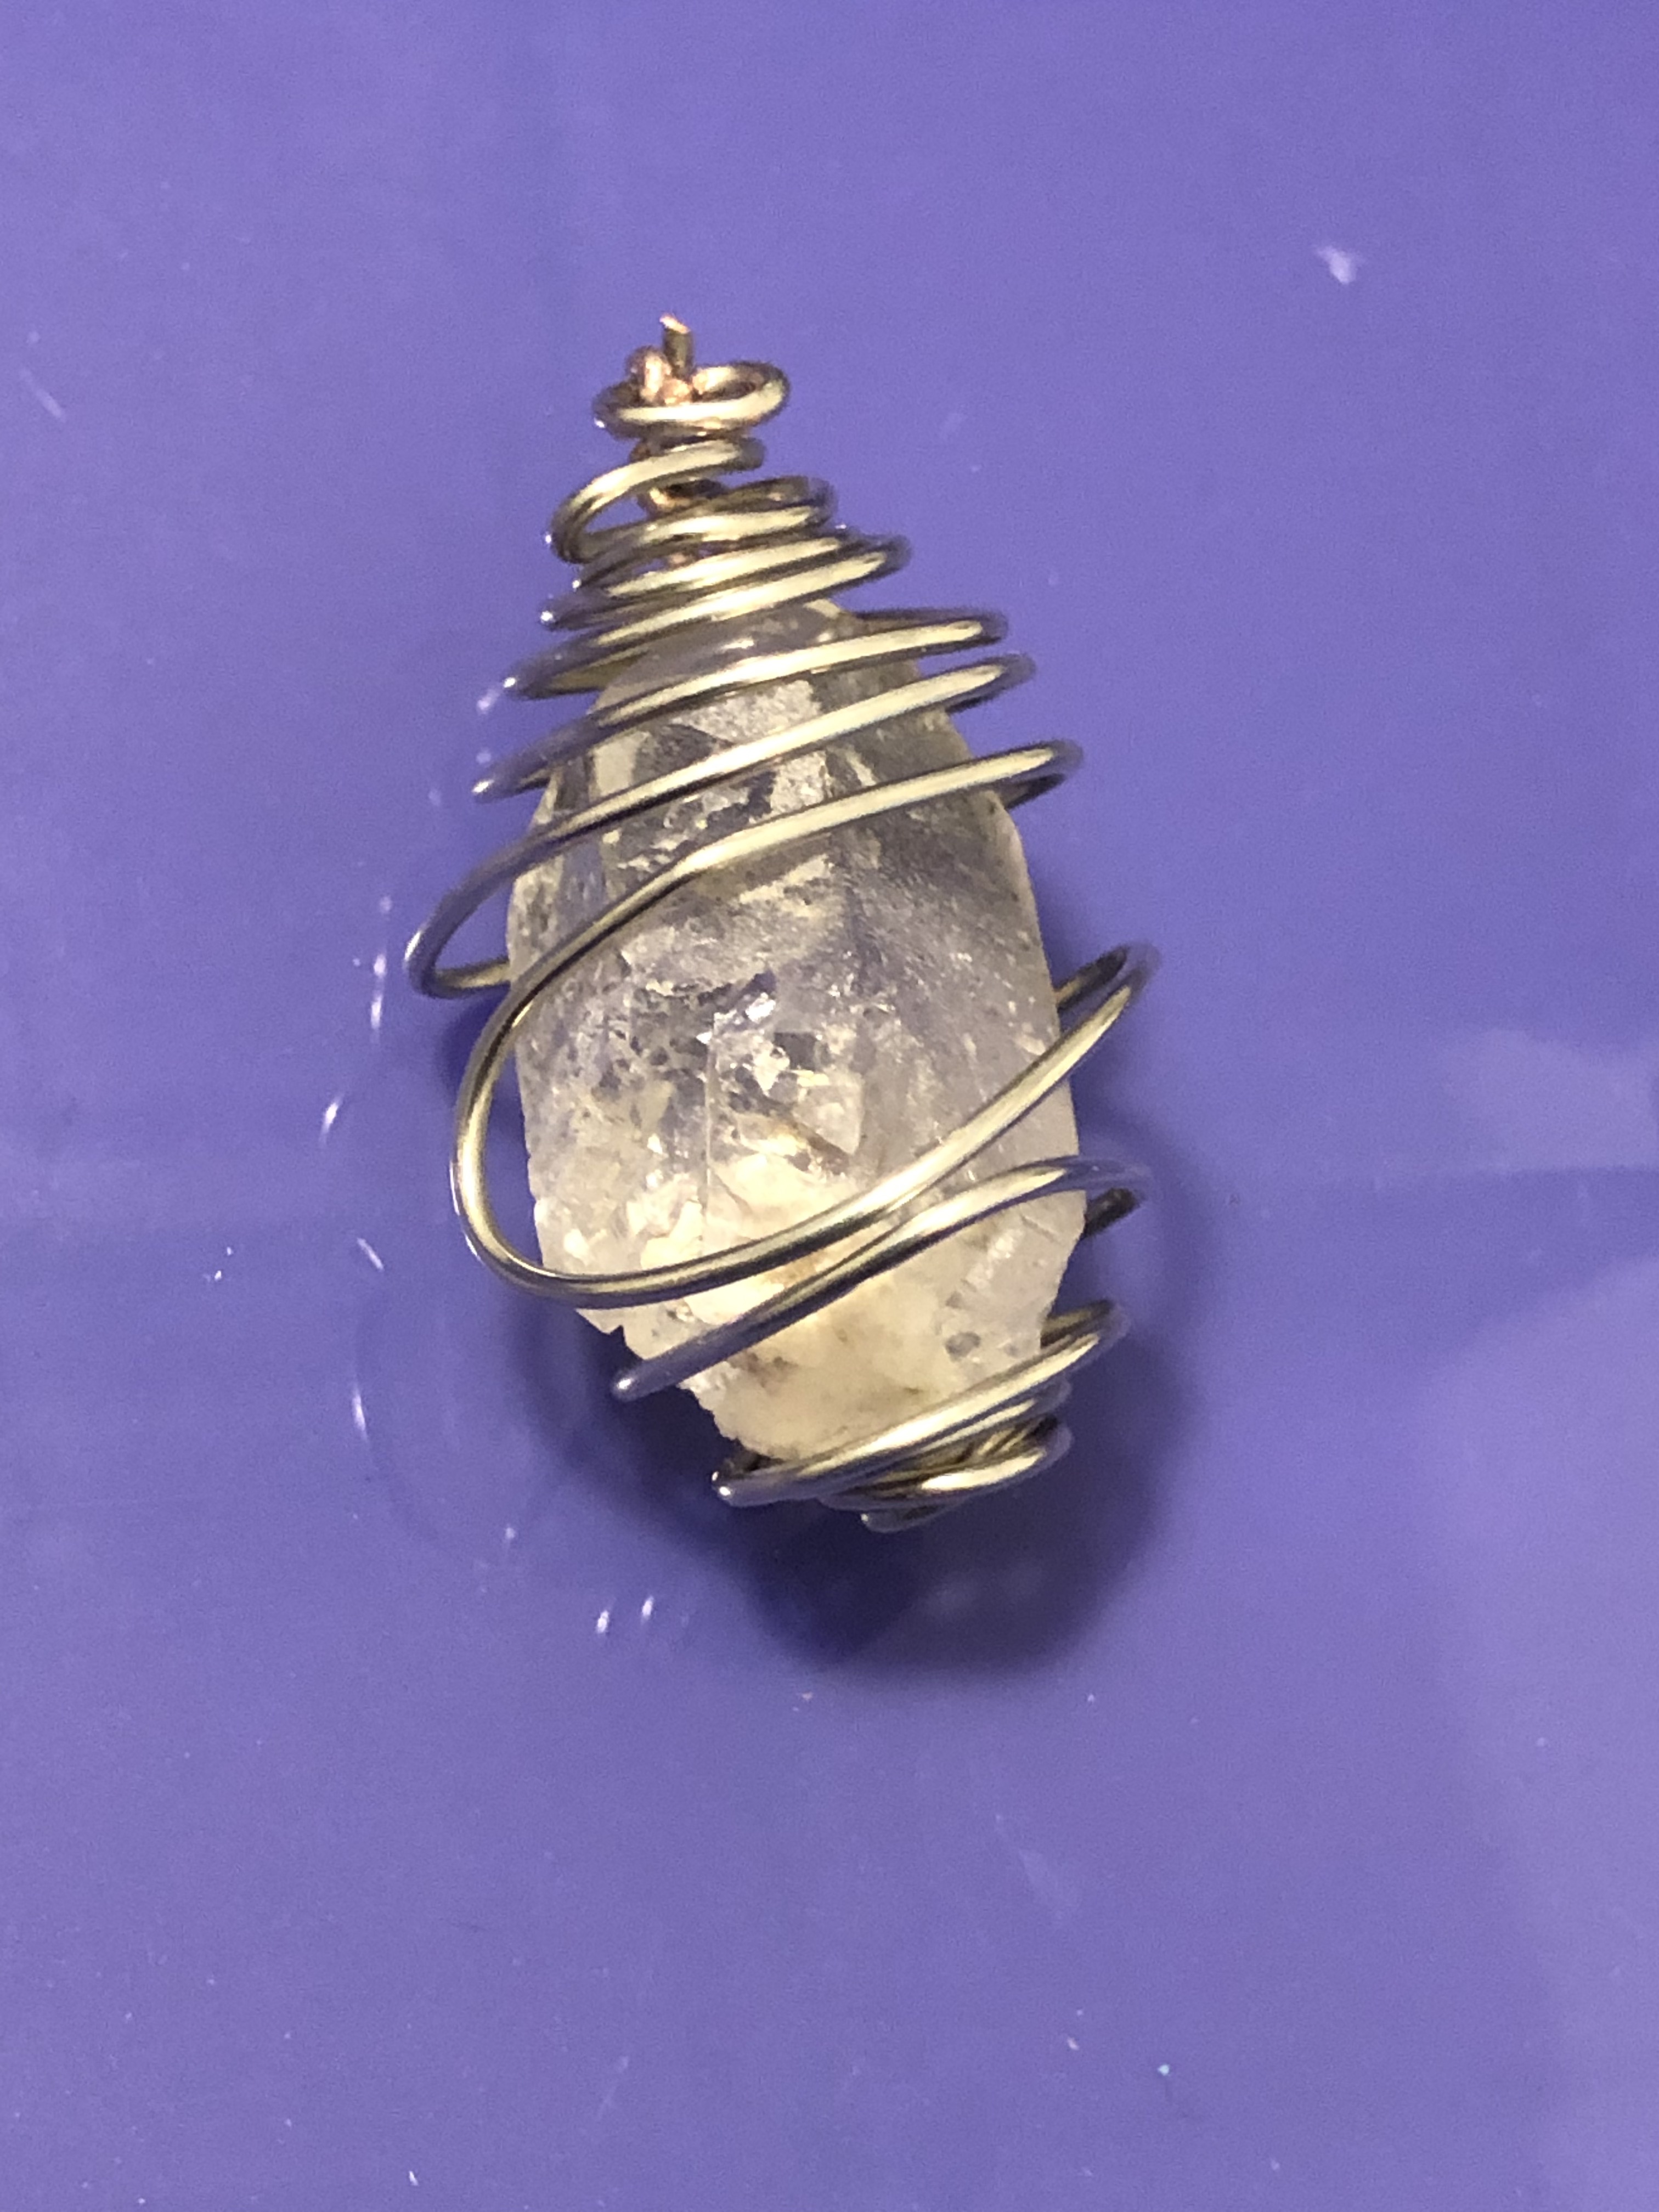 Clear quartz crystal wrapped in wire